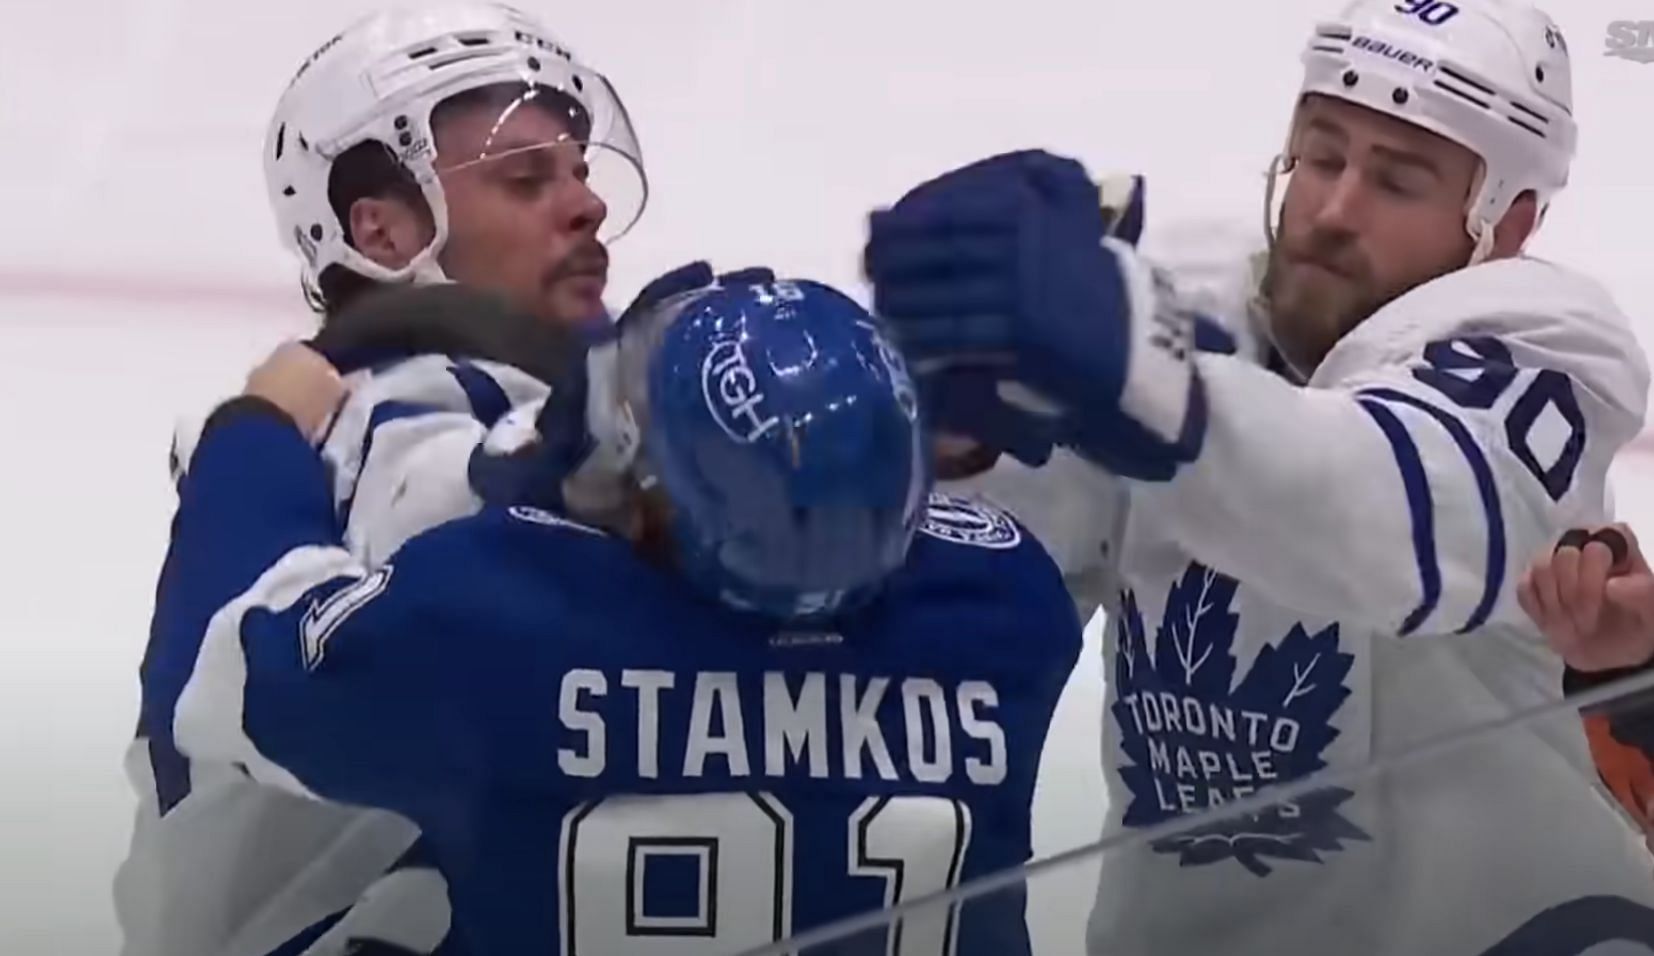 Steve Stamkos scrapped with Leafs forward as payback for hit on Brayden Point